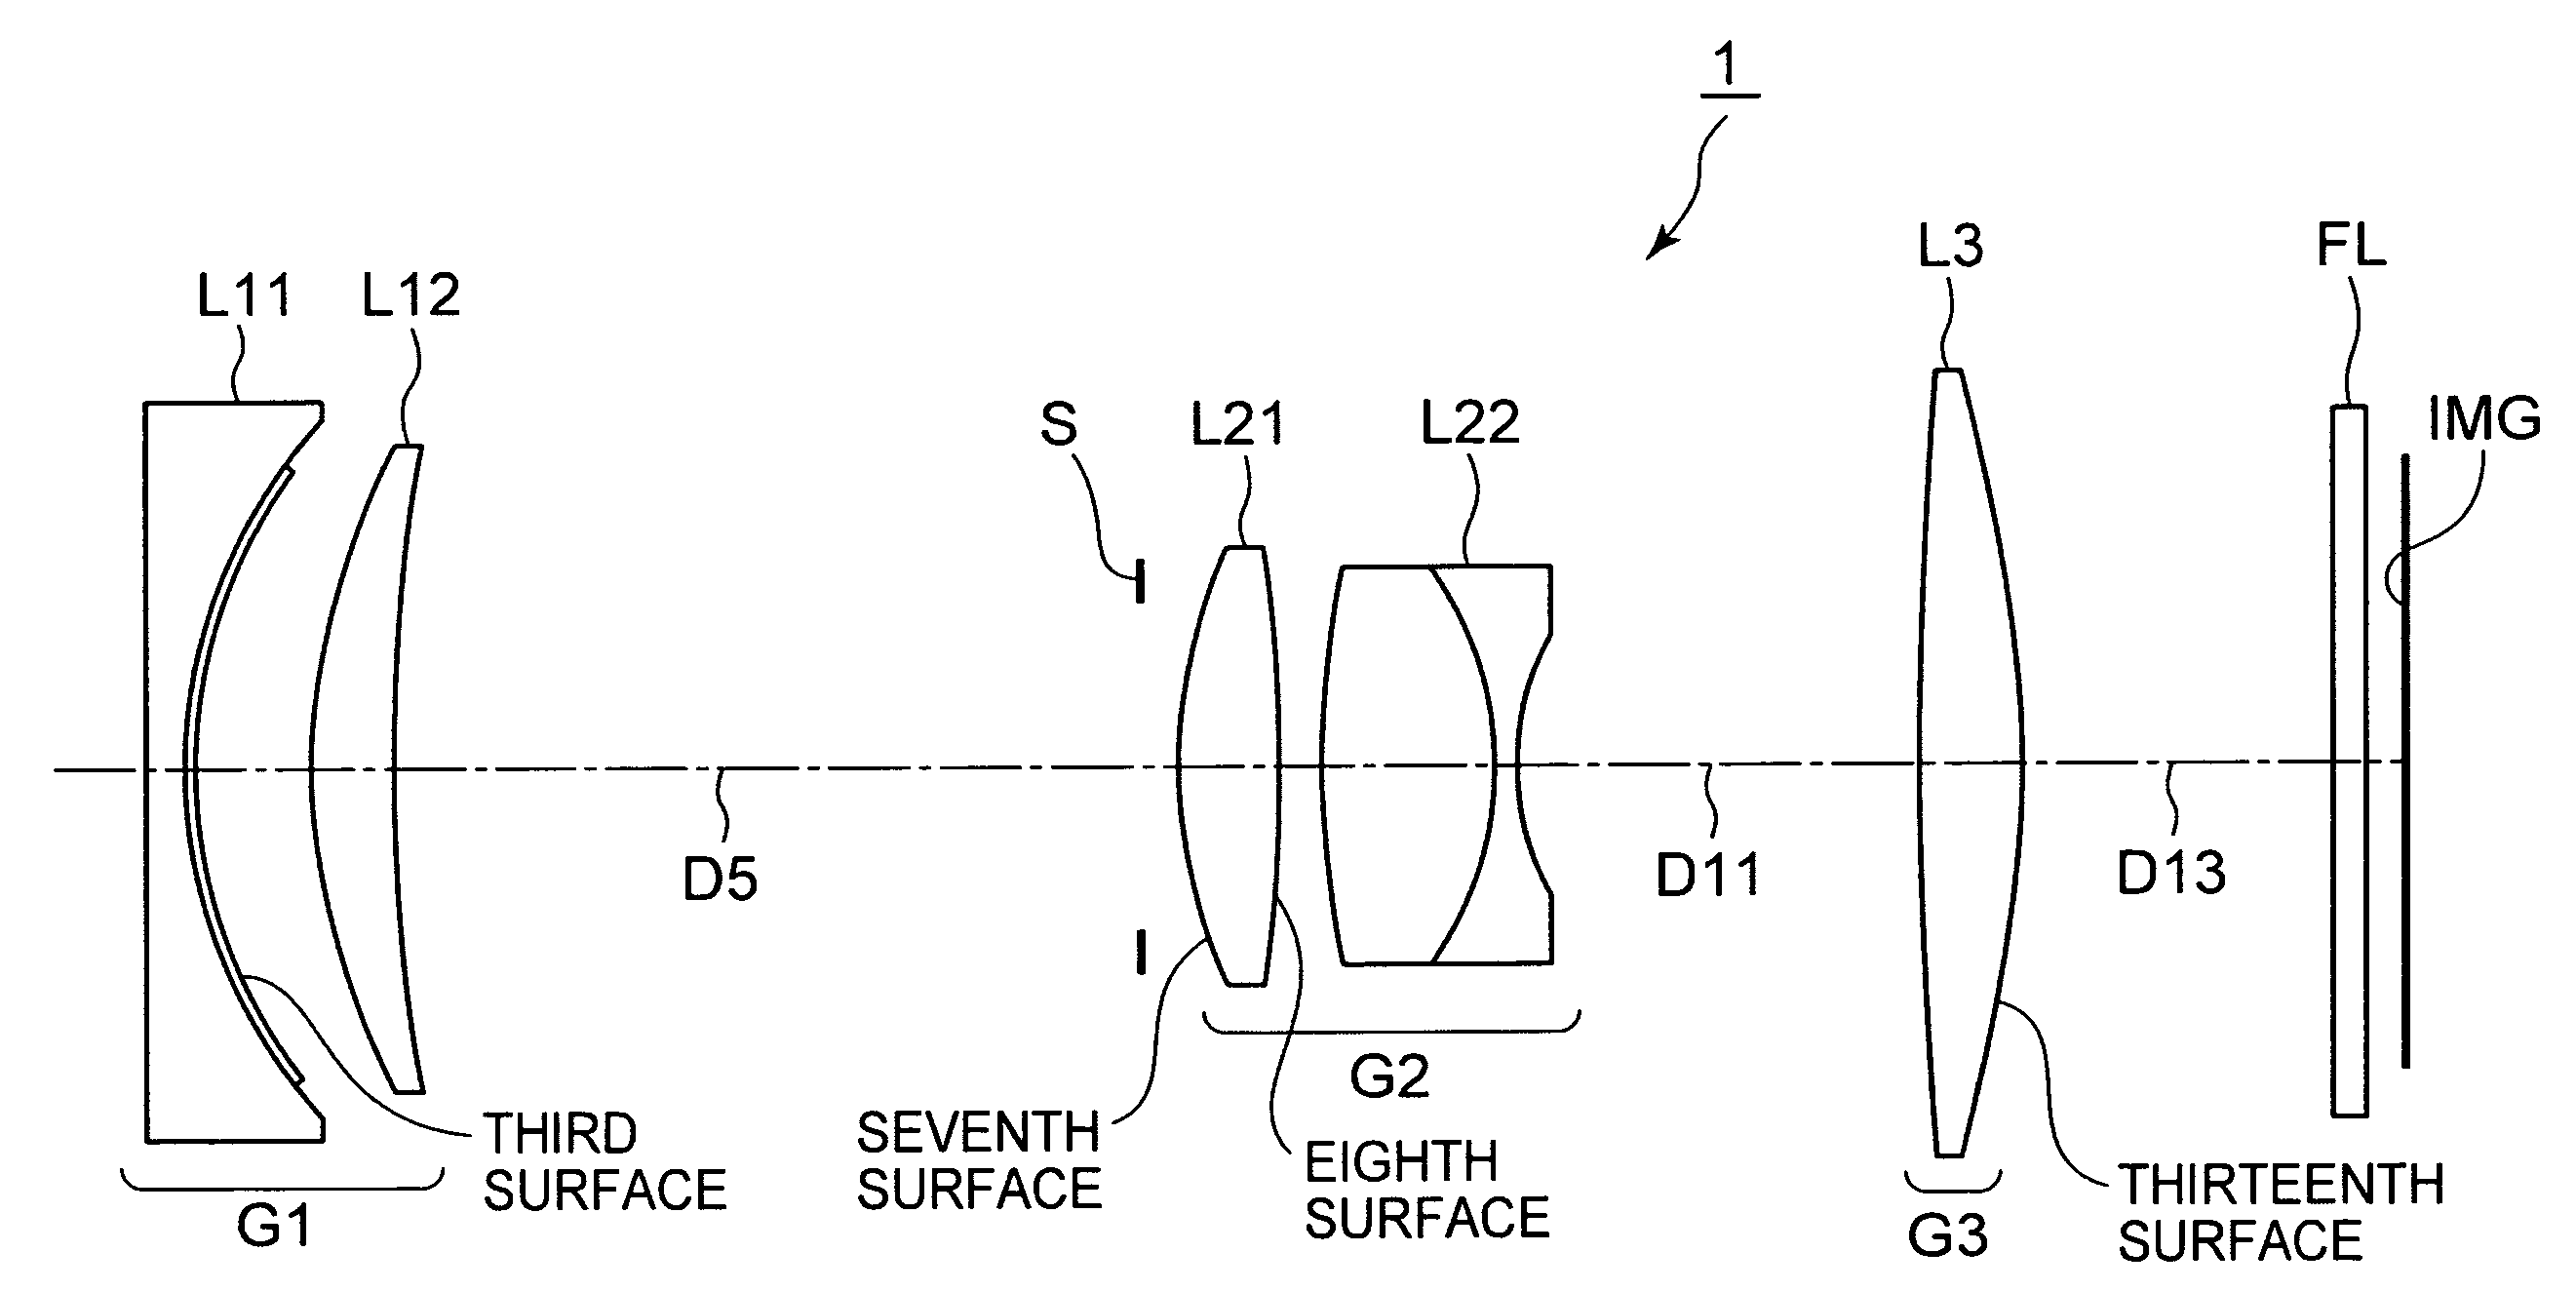 Zoom Lens and image pickup apparatus